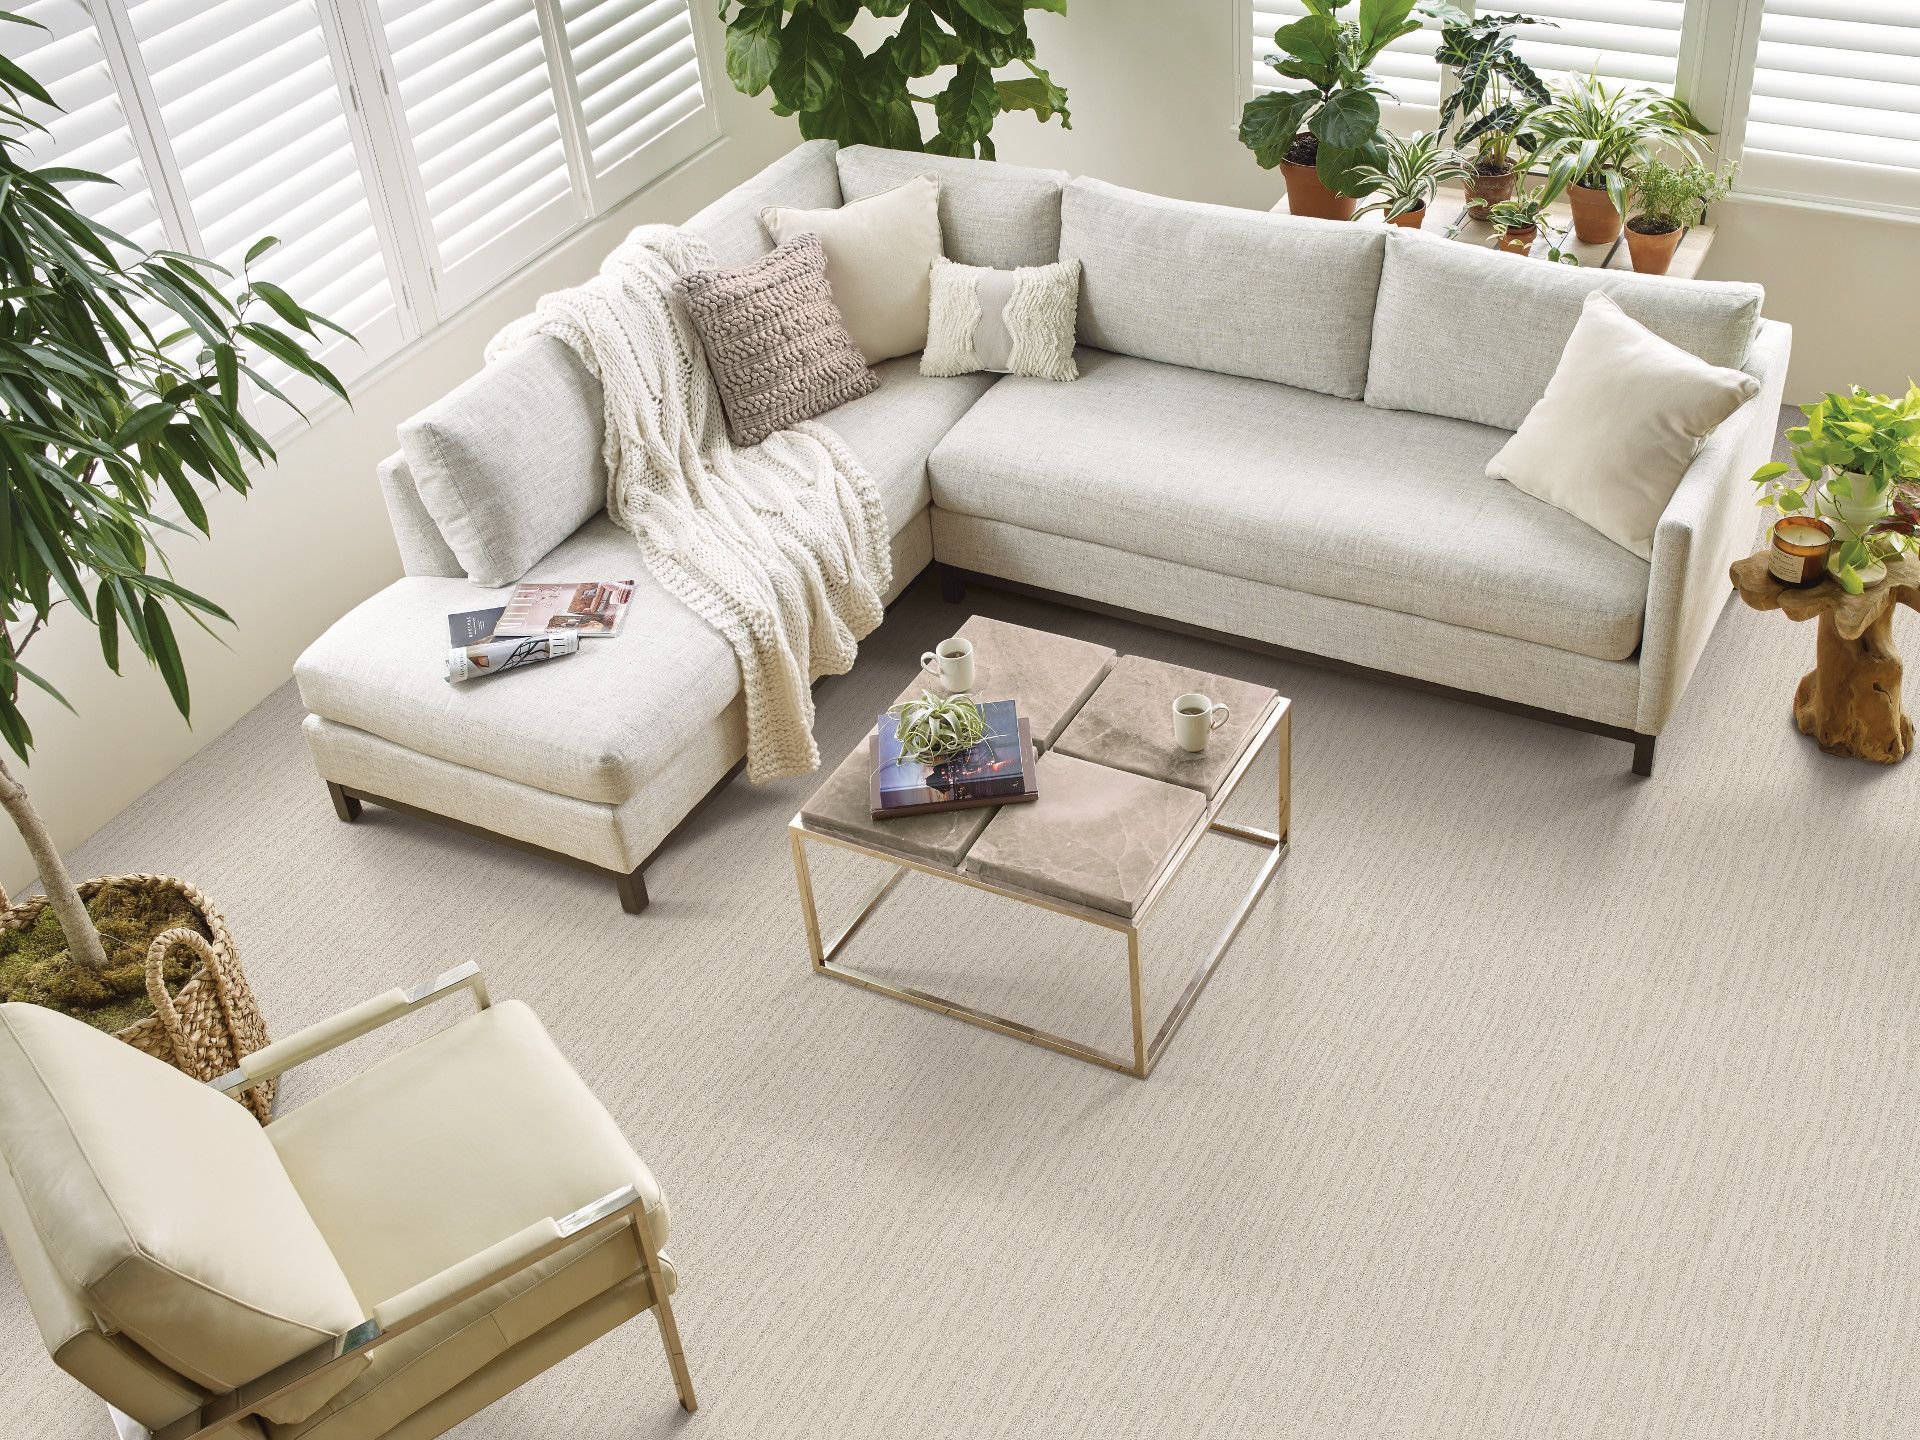 Large living room with white couch on carpet from Carpet Studio & Design Inc. in Los Angeles